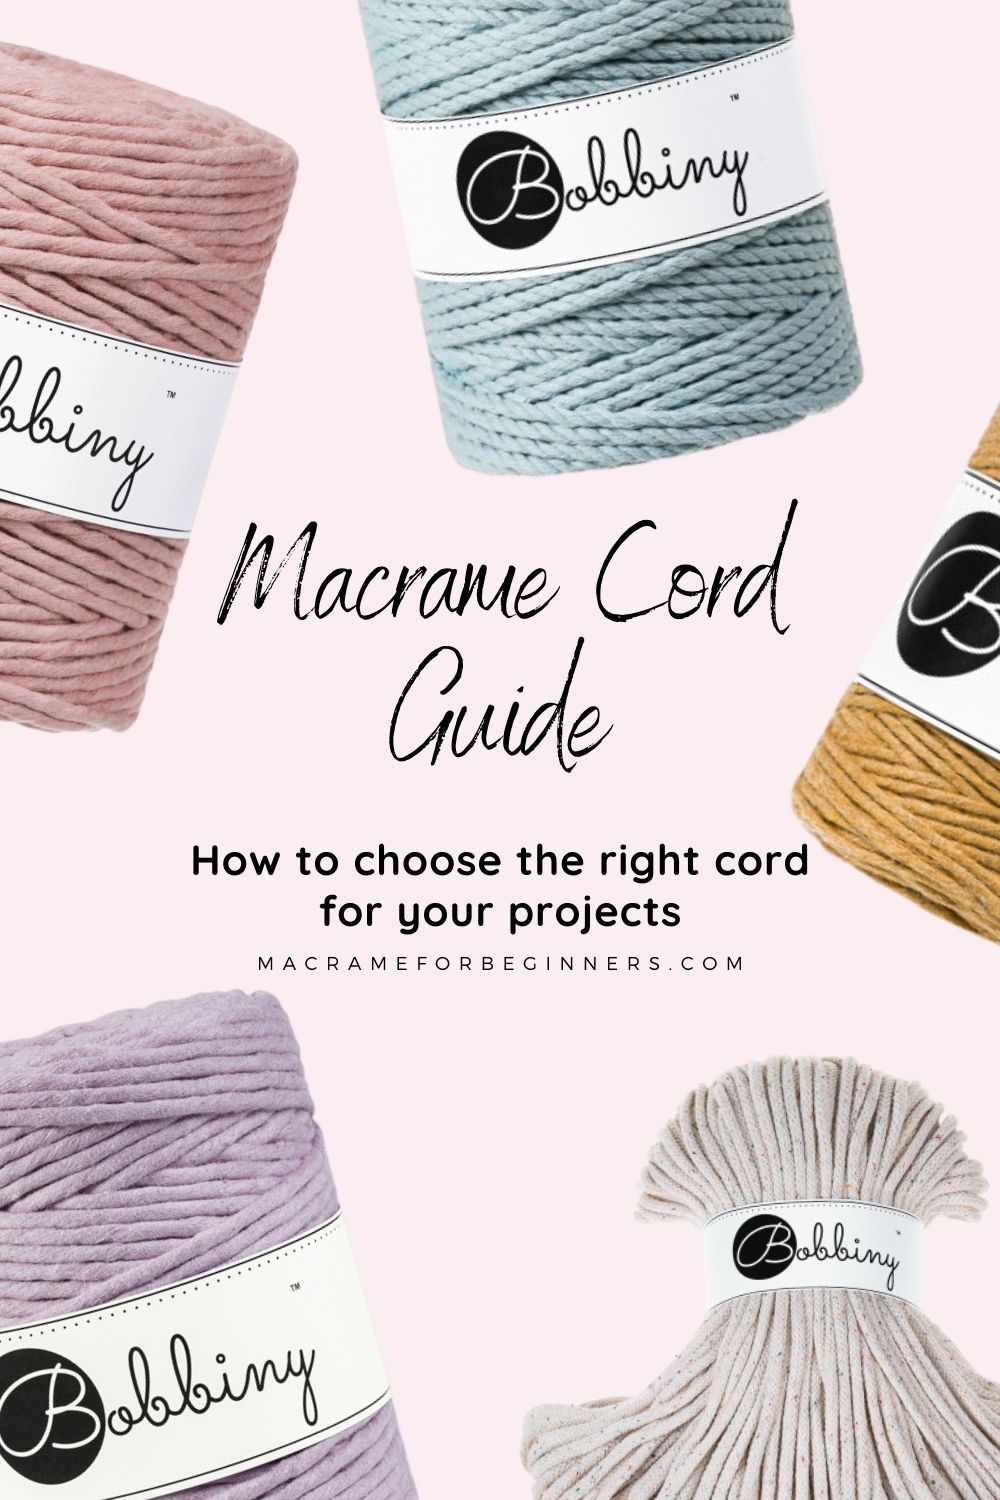 Macrame Cord Guide - Macrame Basics – Choosing the Right Macrame Cords for Your Project - Macrame for Beginners Pin